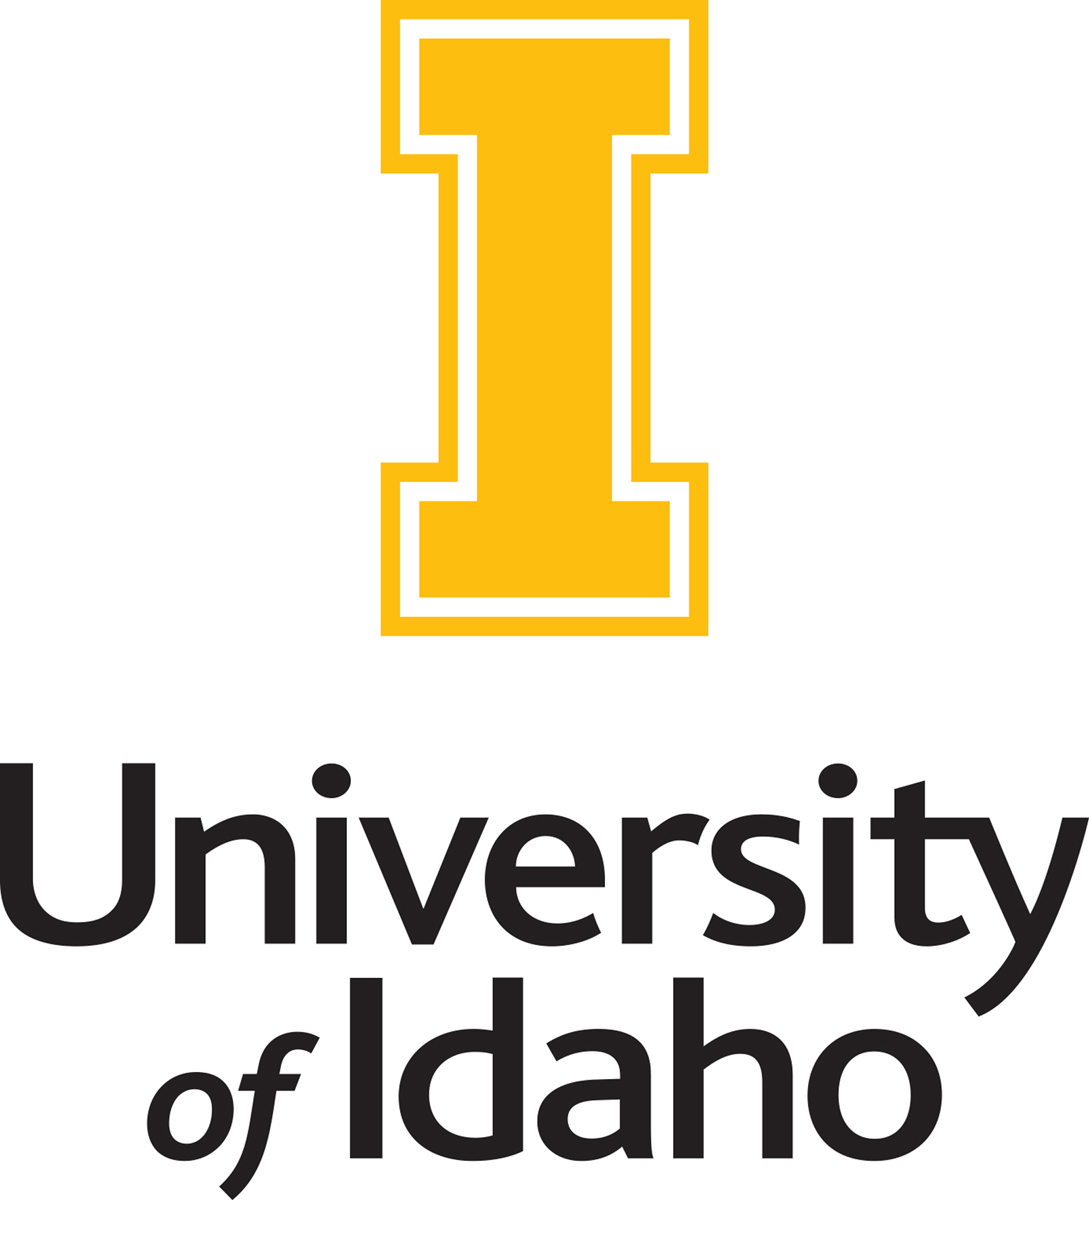 university of idaho logo - a yellow capital I with a yellow border and black lettering for University of Idaho, with "of" italicized